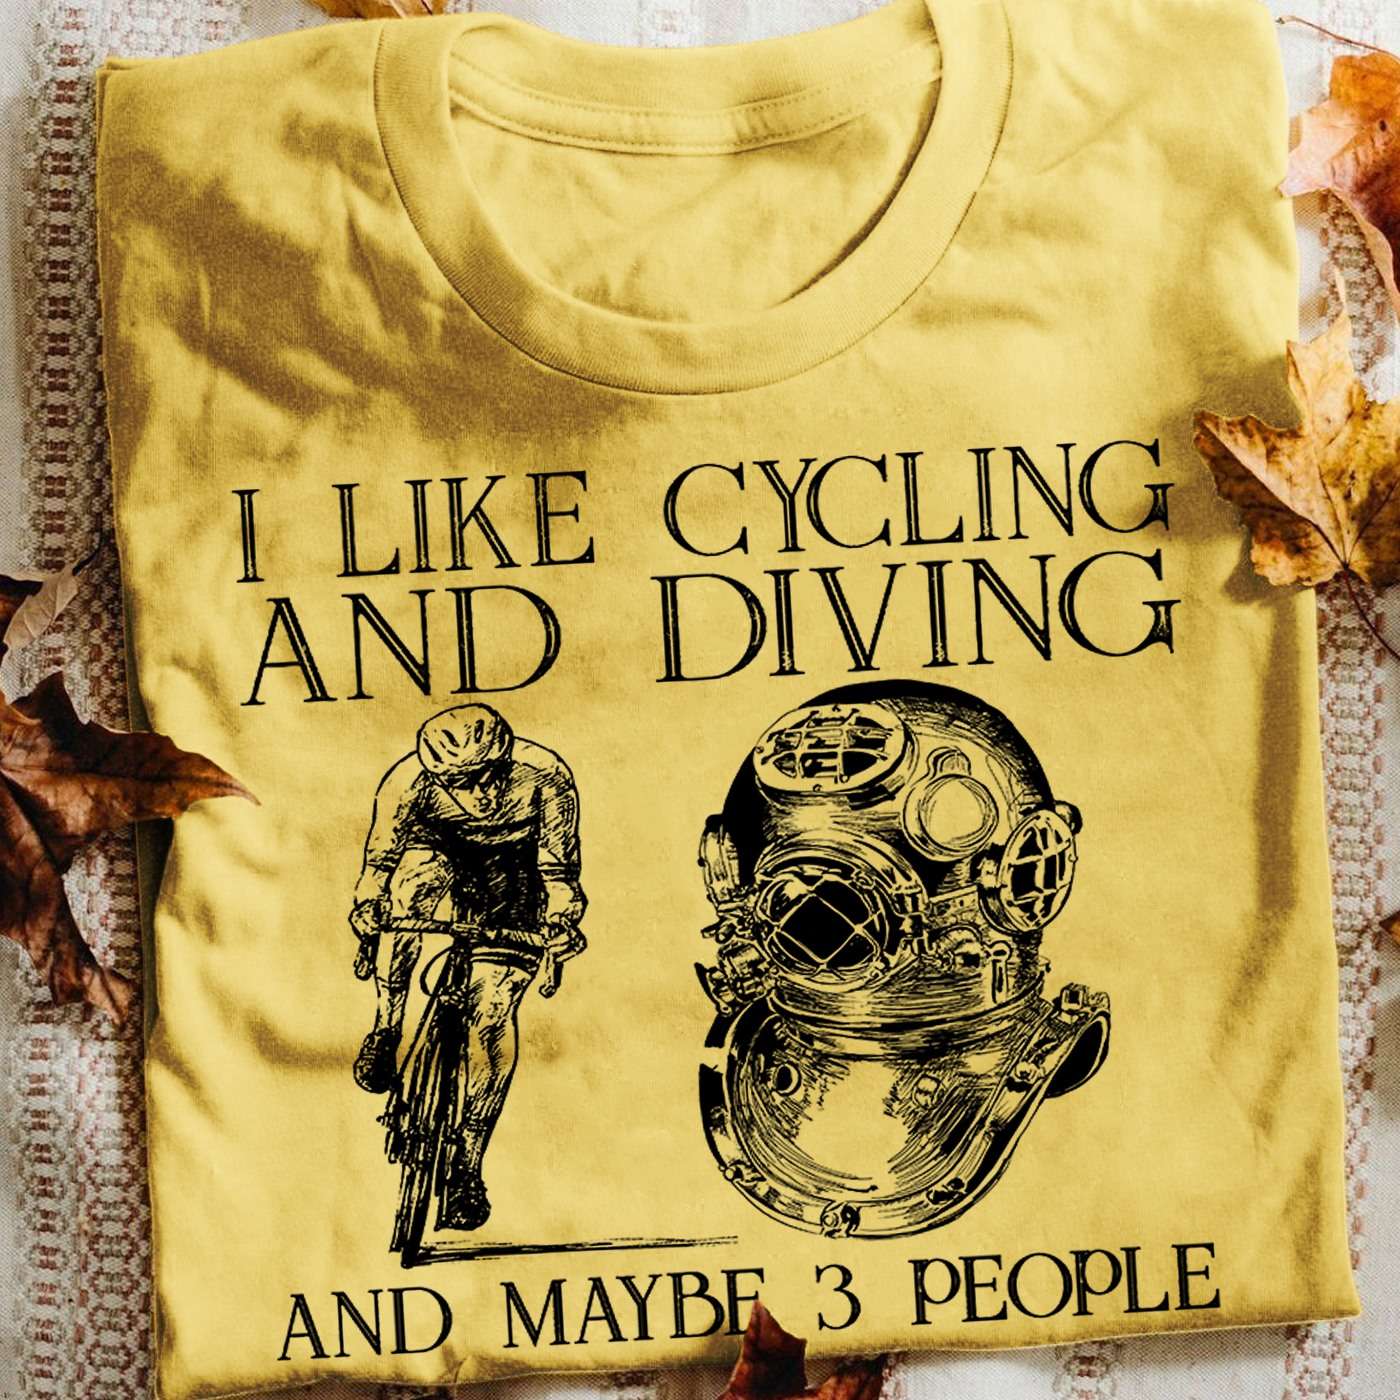 I like cycling and diving